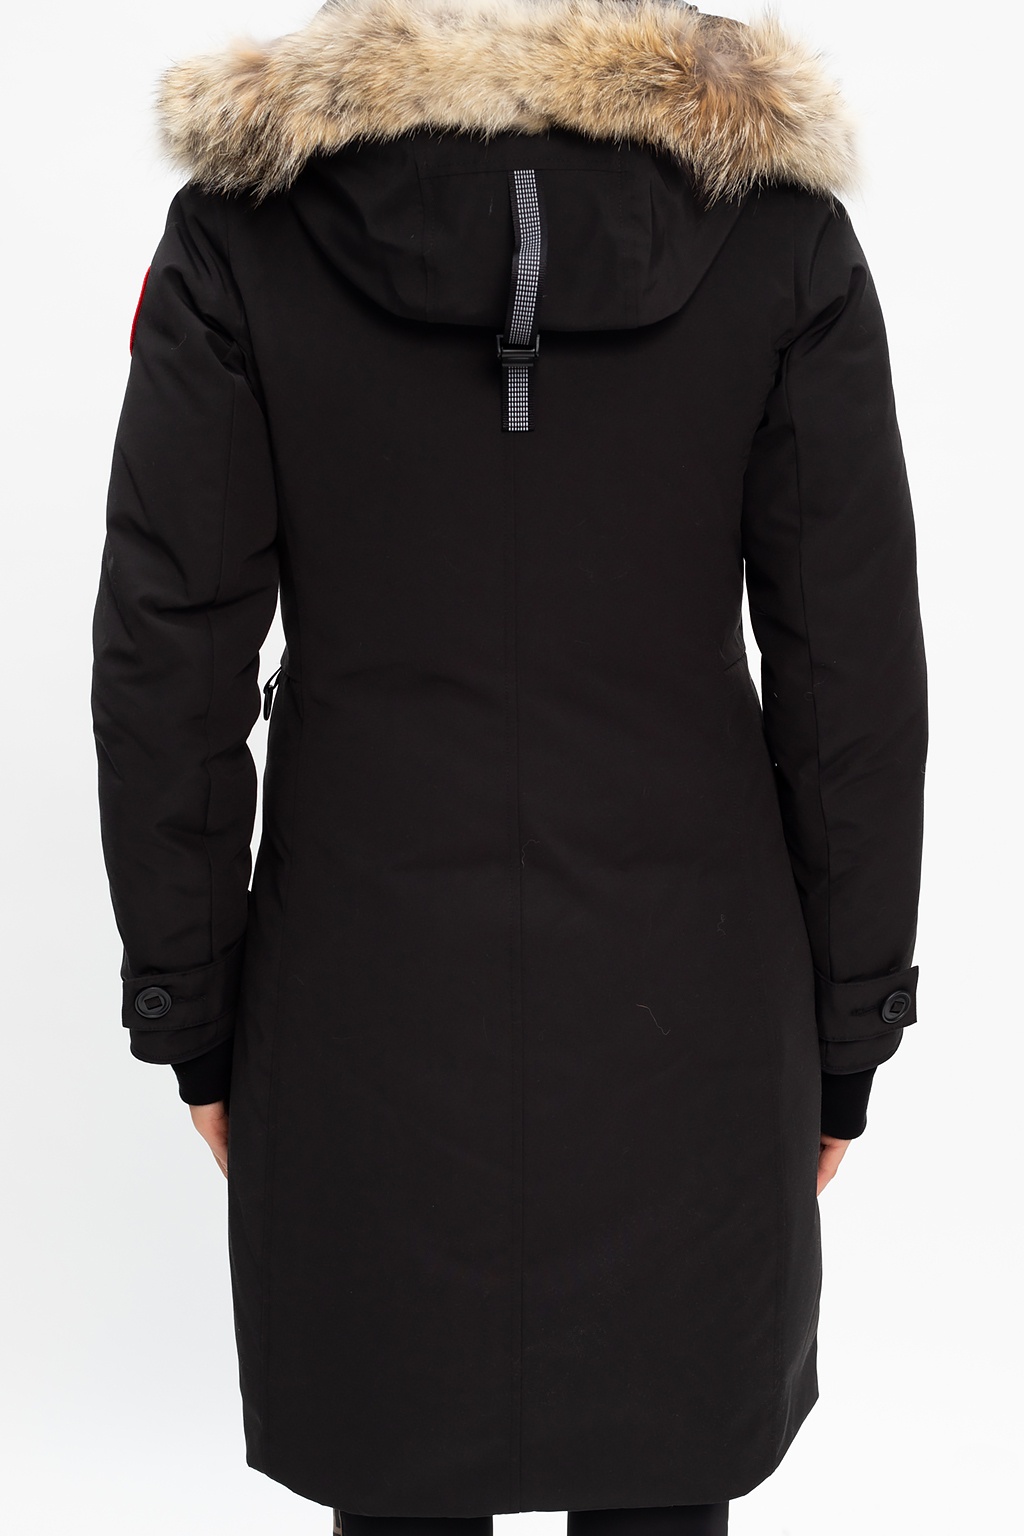 Canada Goose Hooded down BOSS jacket